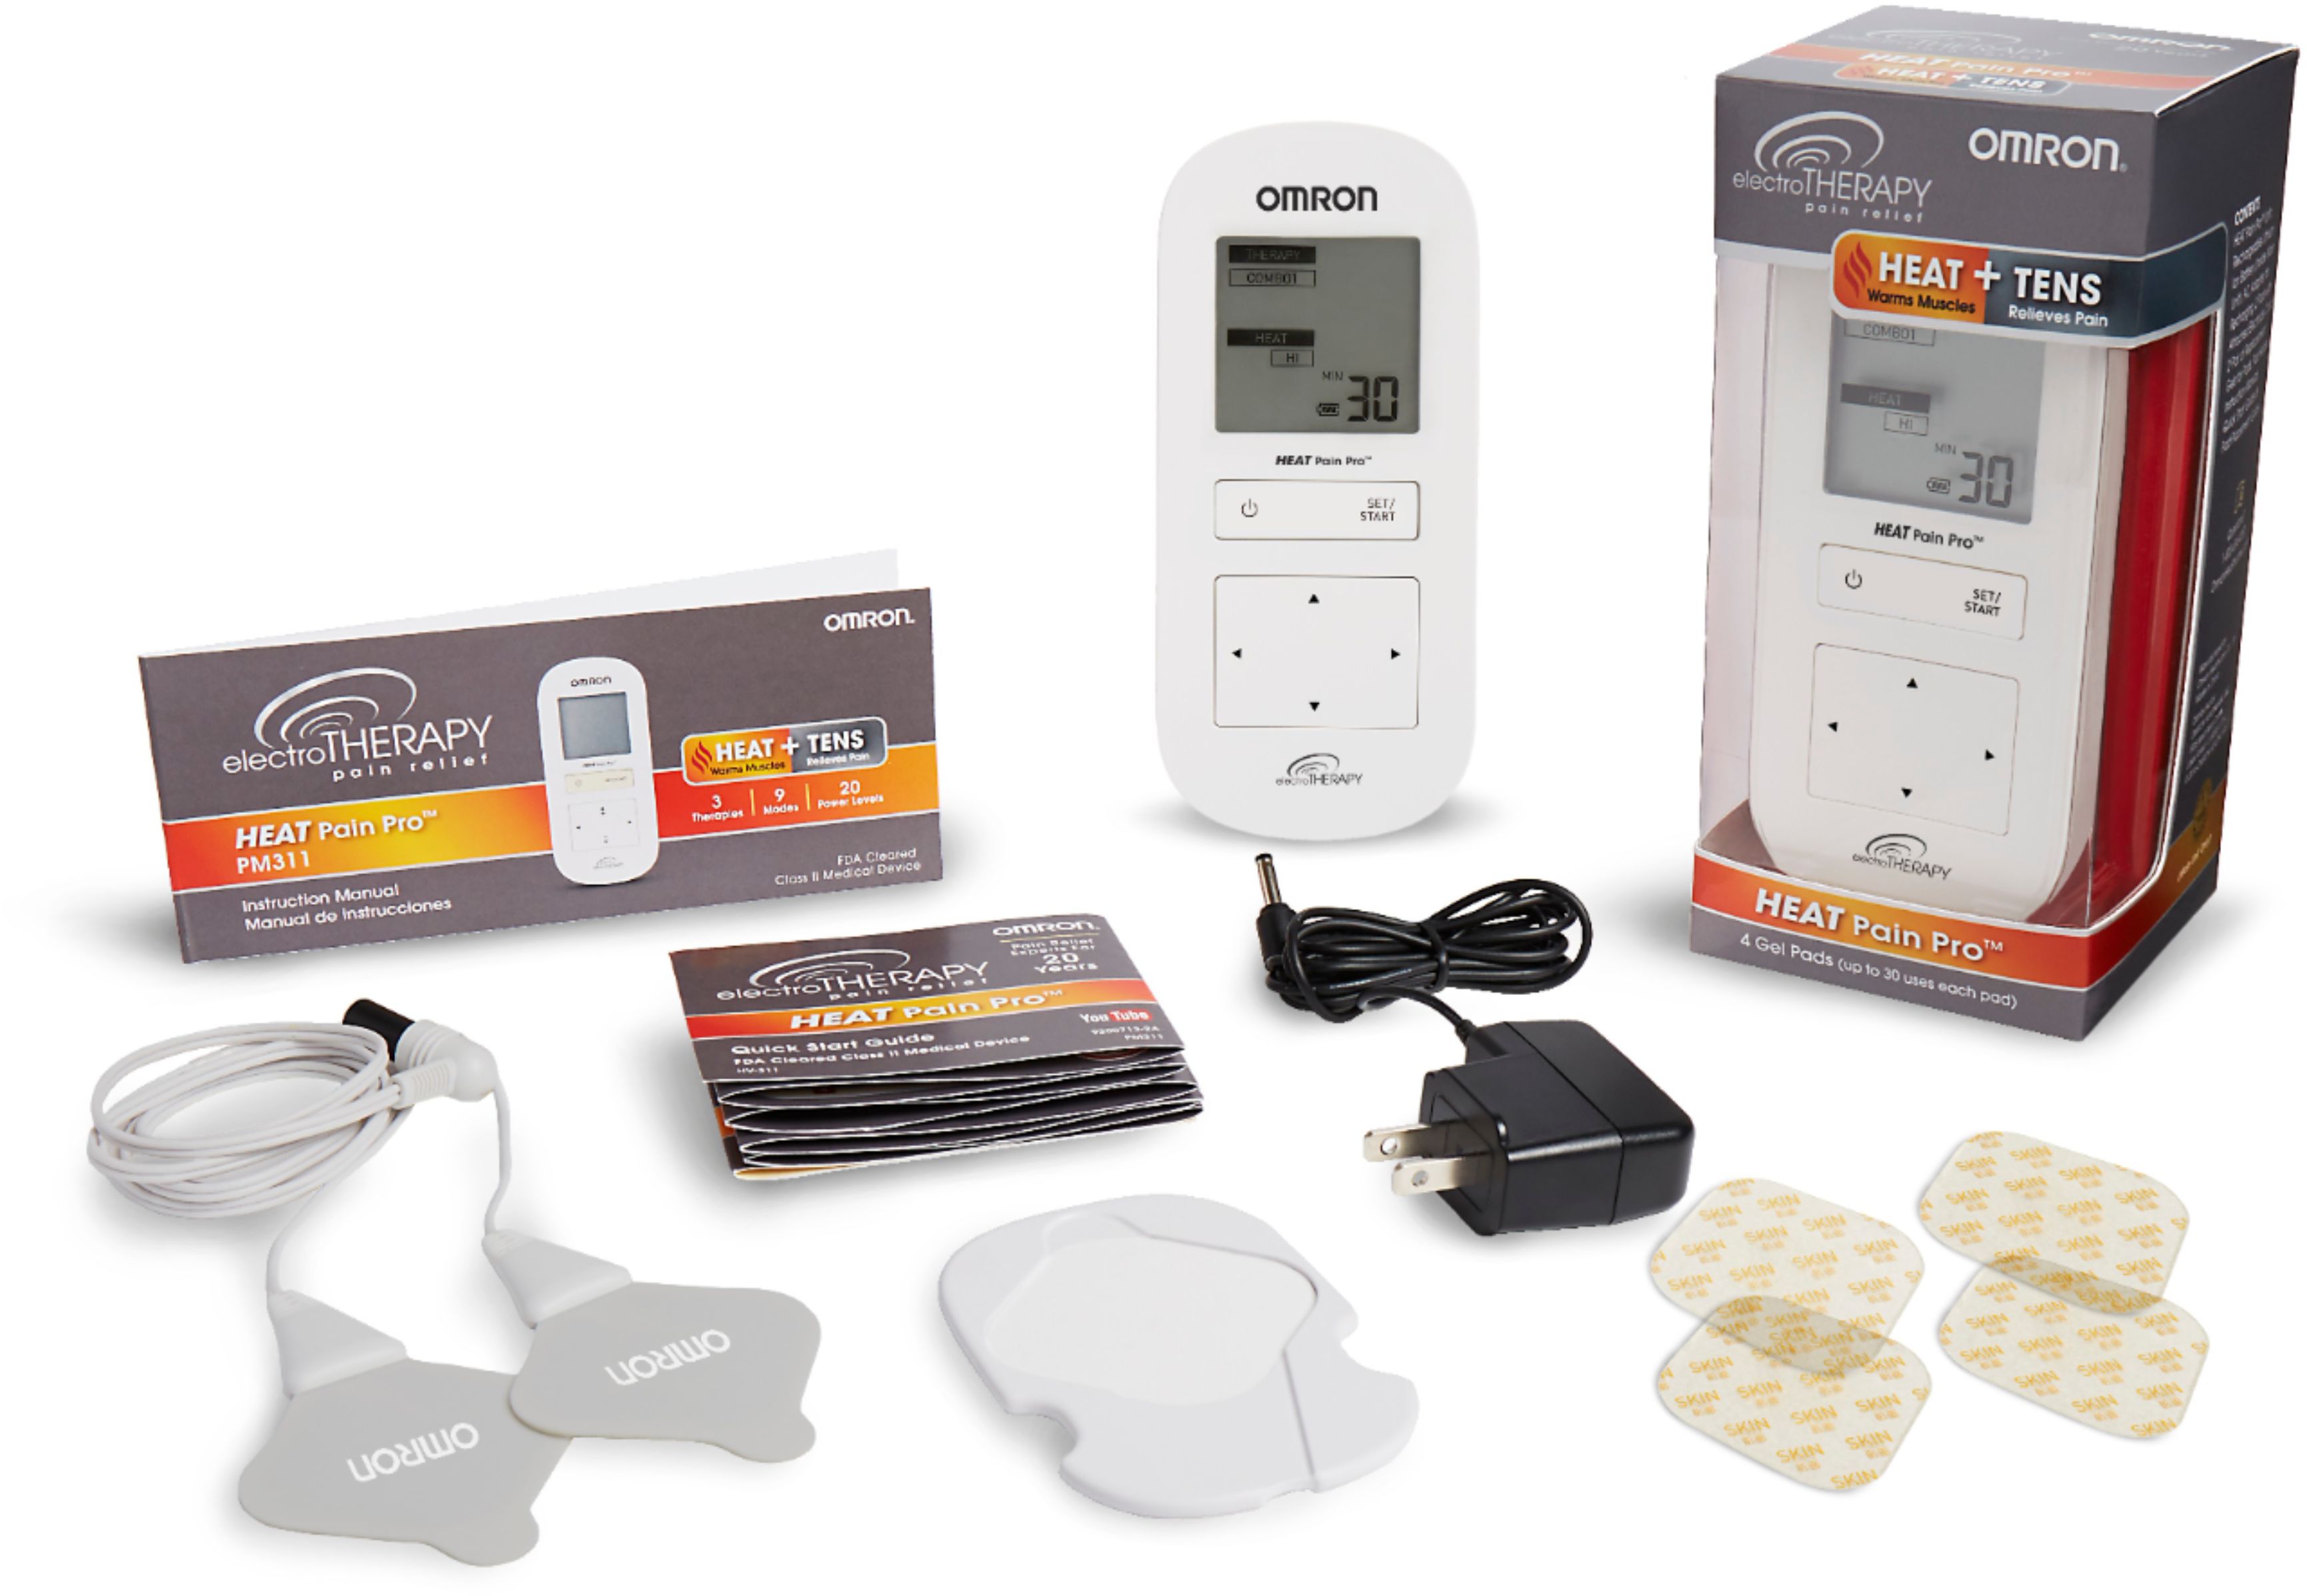 Omron ElectroTHERAPY Pain Relief TENS unit